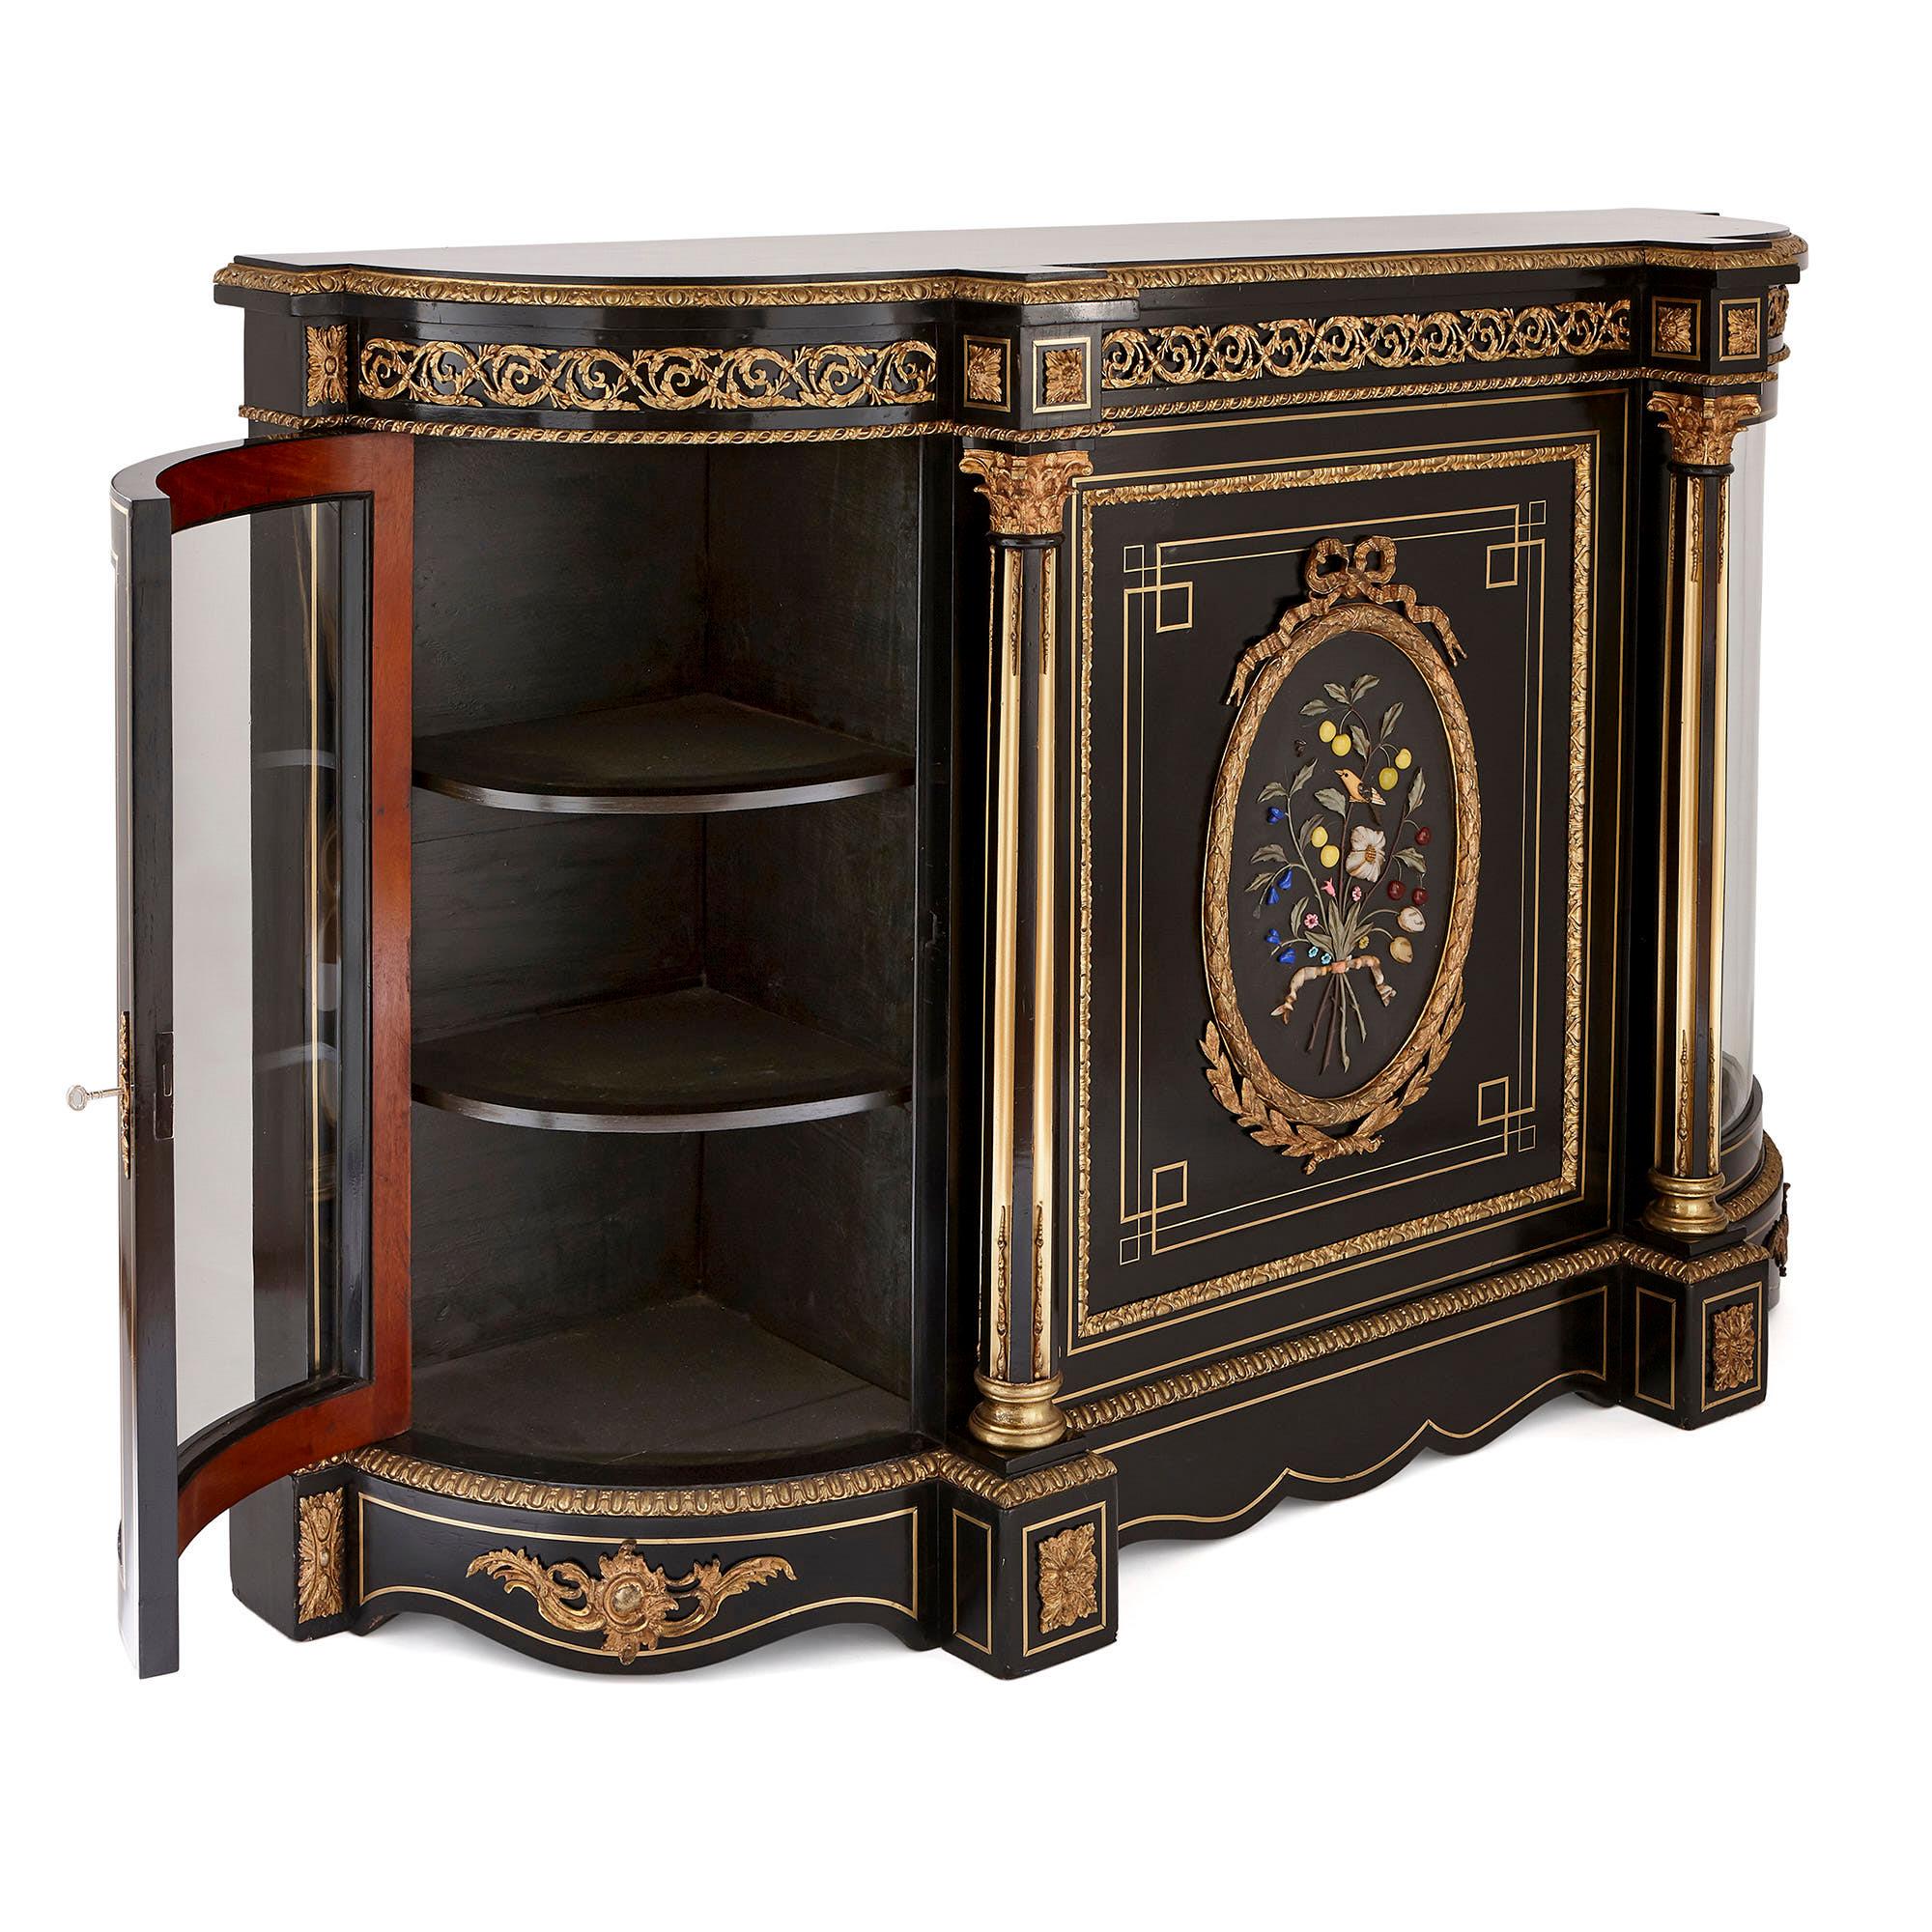 This cabinet is an exquisite piece of antique furniture, which is crafted from beautifully-contrasting ebonised wood, golden gilt bronze (ormolu) and colourful hardstones. 

The cabinet is composed of a wide, bombé-fronted body which is set on